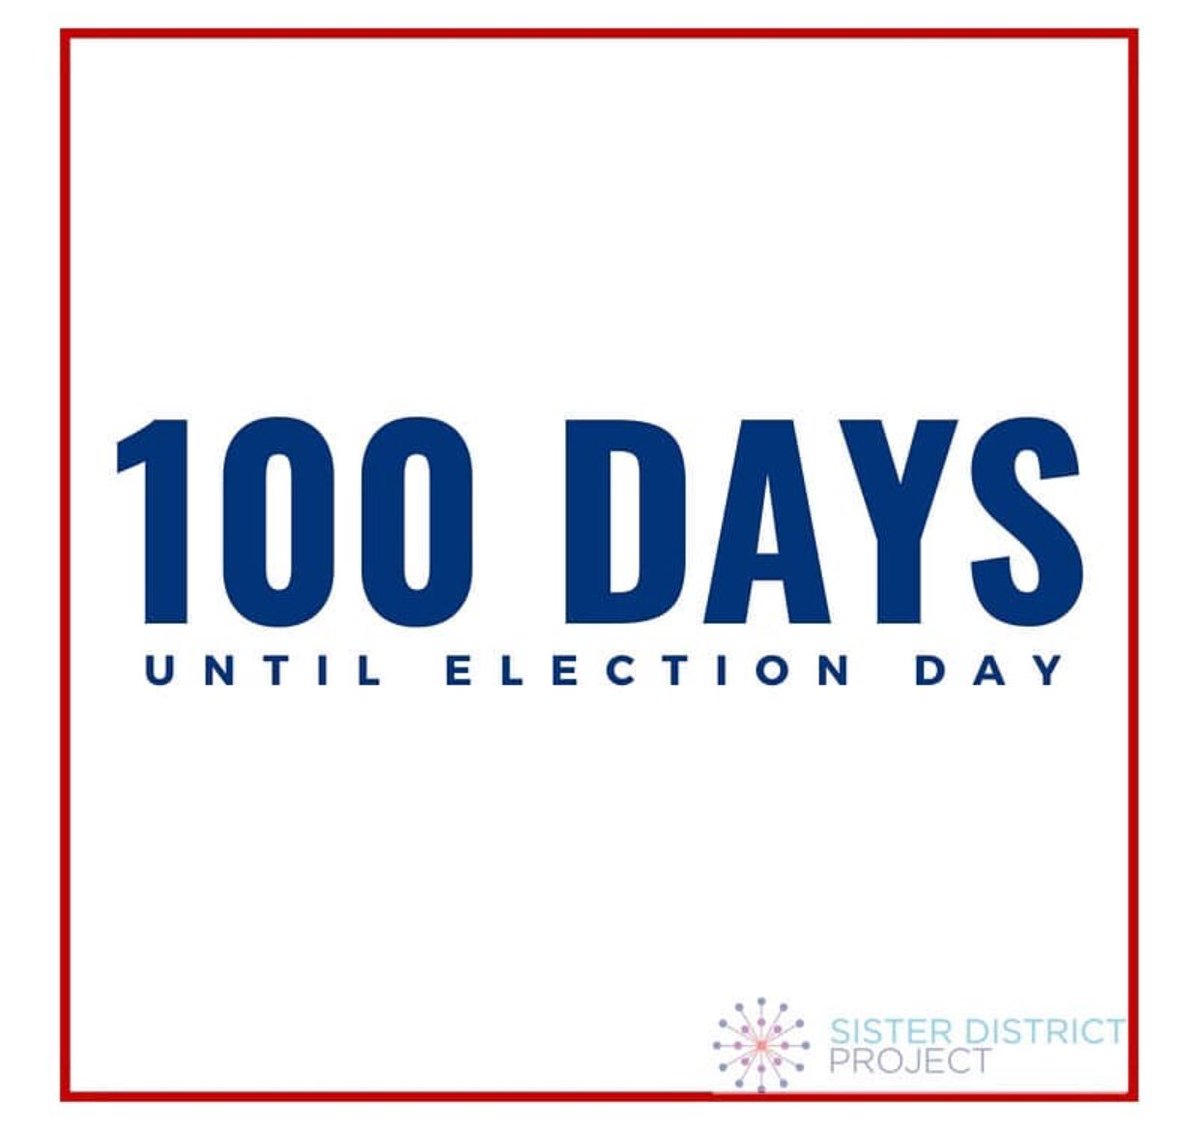 100 days until Election Day. That’s 100 days to get involved! Don’t sit on the sidelines. We’ve got lots of options for you at @Sister_District, whether you have a few hours, a few dollars, or mountains of both! #BlueWave2018 #ItStartswithStates